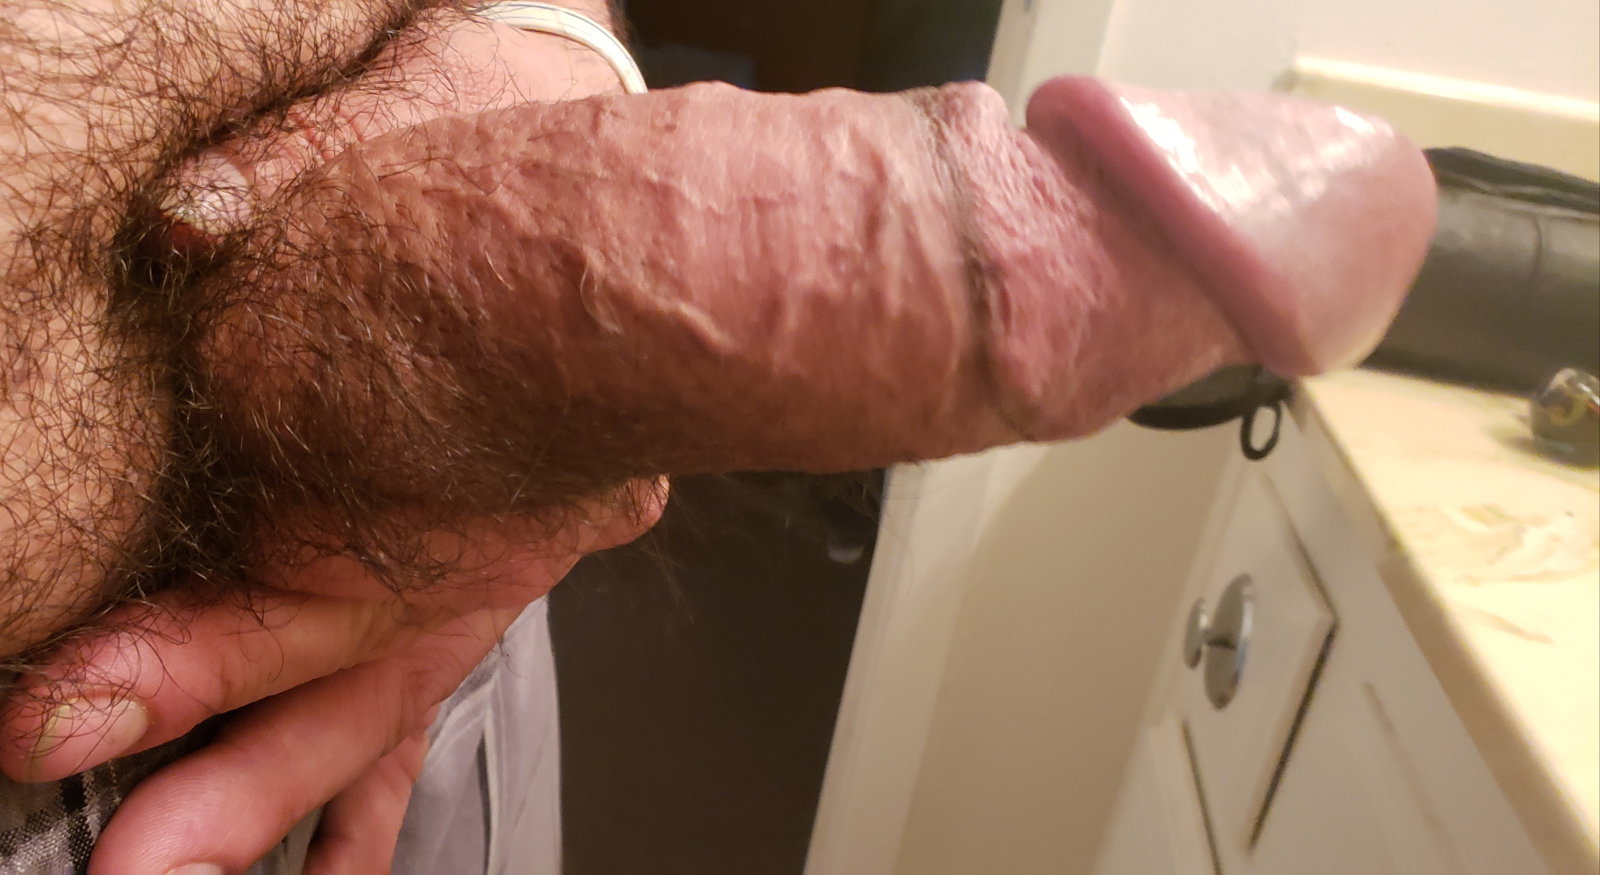 Photo by Rasz67 with the username @Rasz67,  October 19, 2019 at 1:59 AM. The post is about the topic Rate my pussy or dick and the text says '#rate #cock #fatcock #big #veiny #thick #hung #comment'